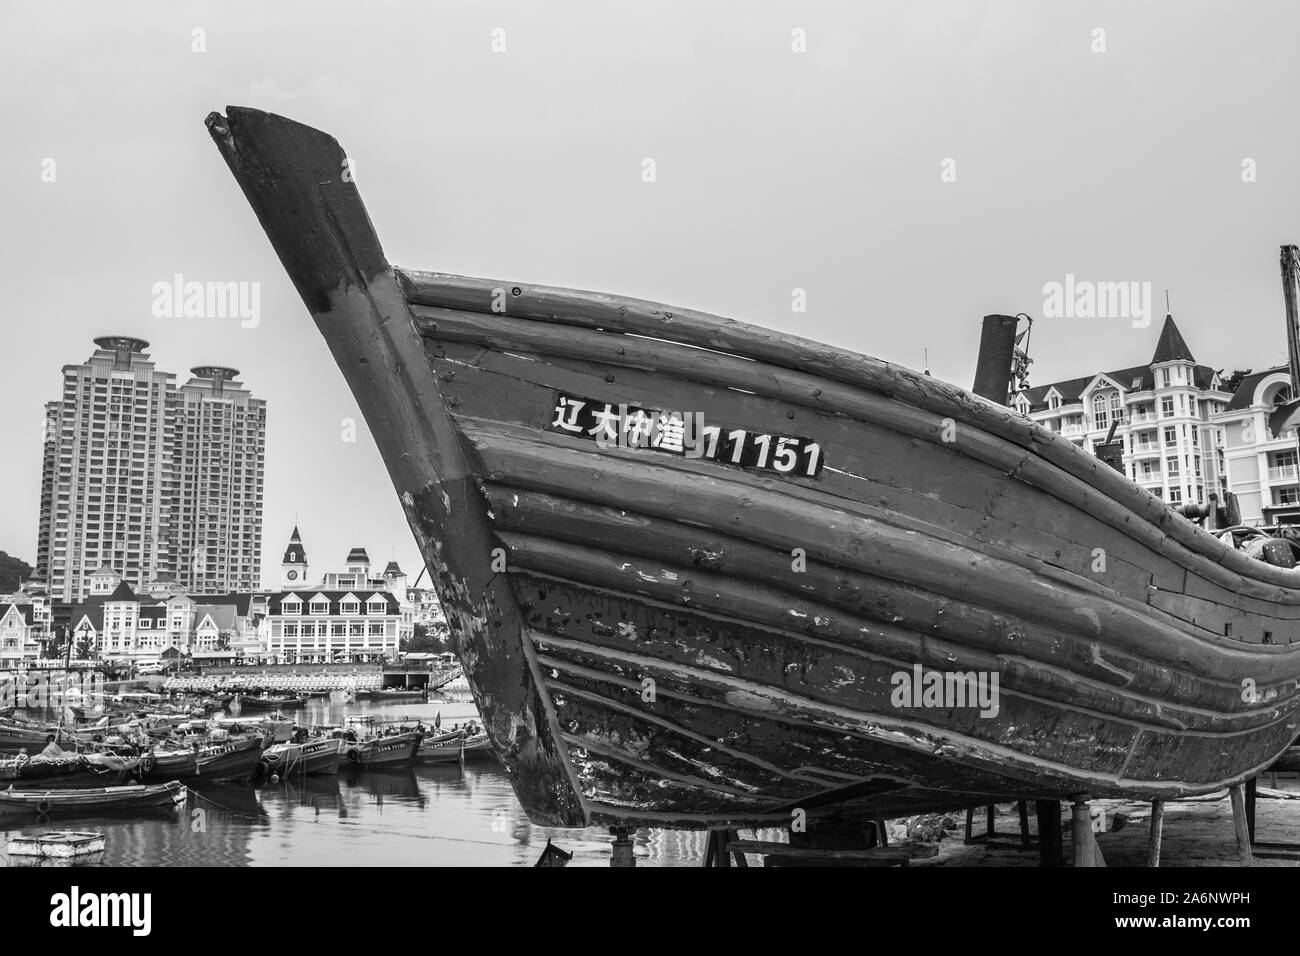 Old boat and new buildings in background. Black and white picture,Dalian, China, 22-8-19 Stock Photo